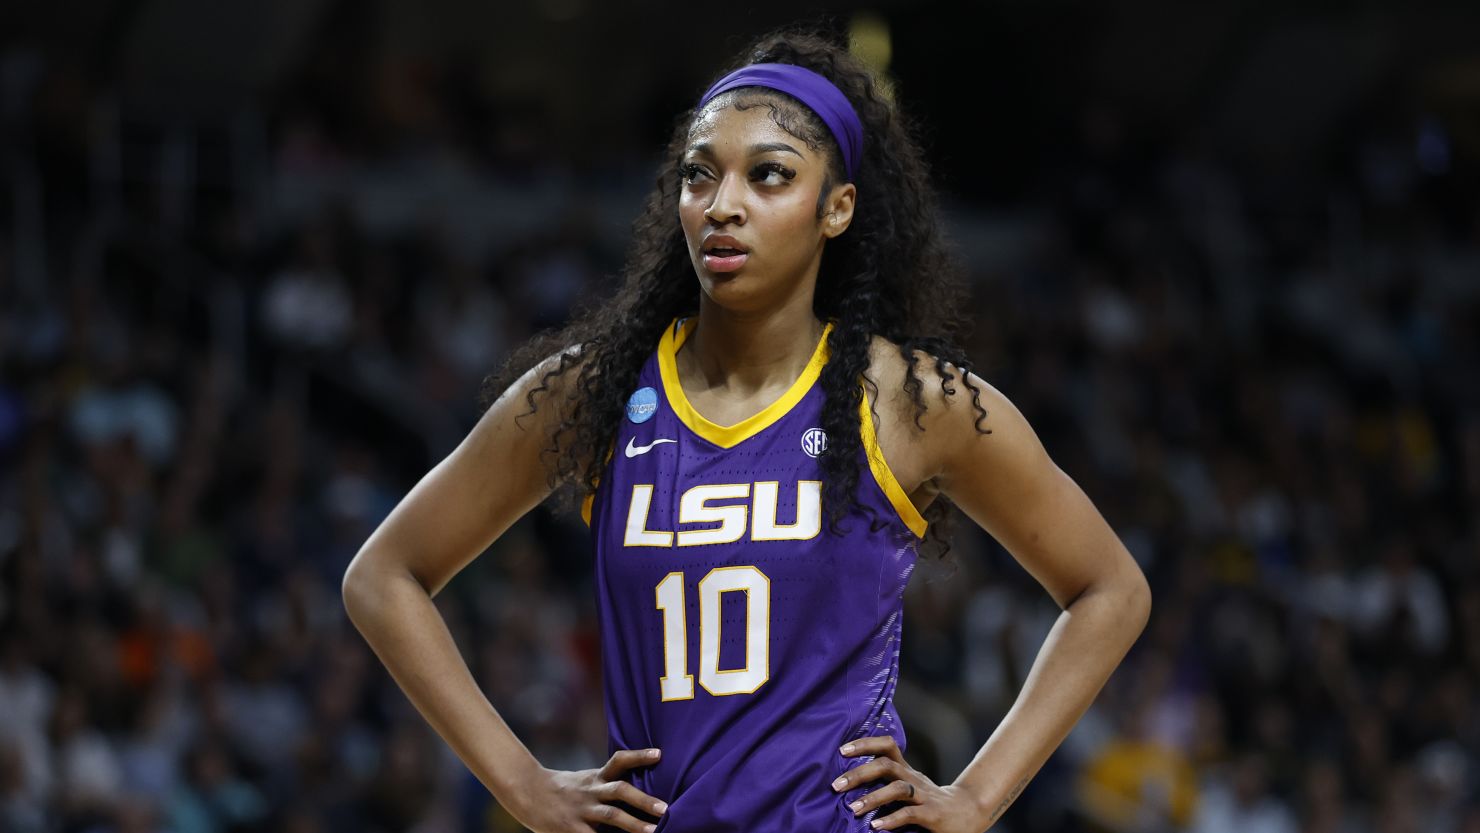 Angel Reese played her final game for the LSU Tigers against the Iowa Hawkeyes.